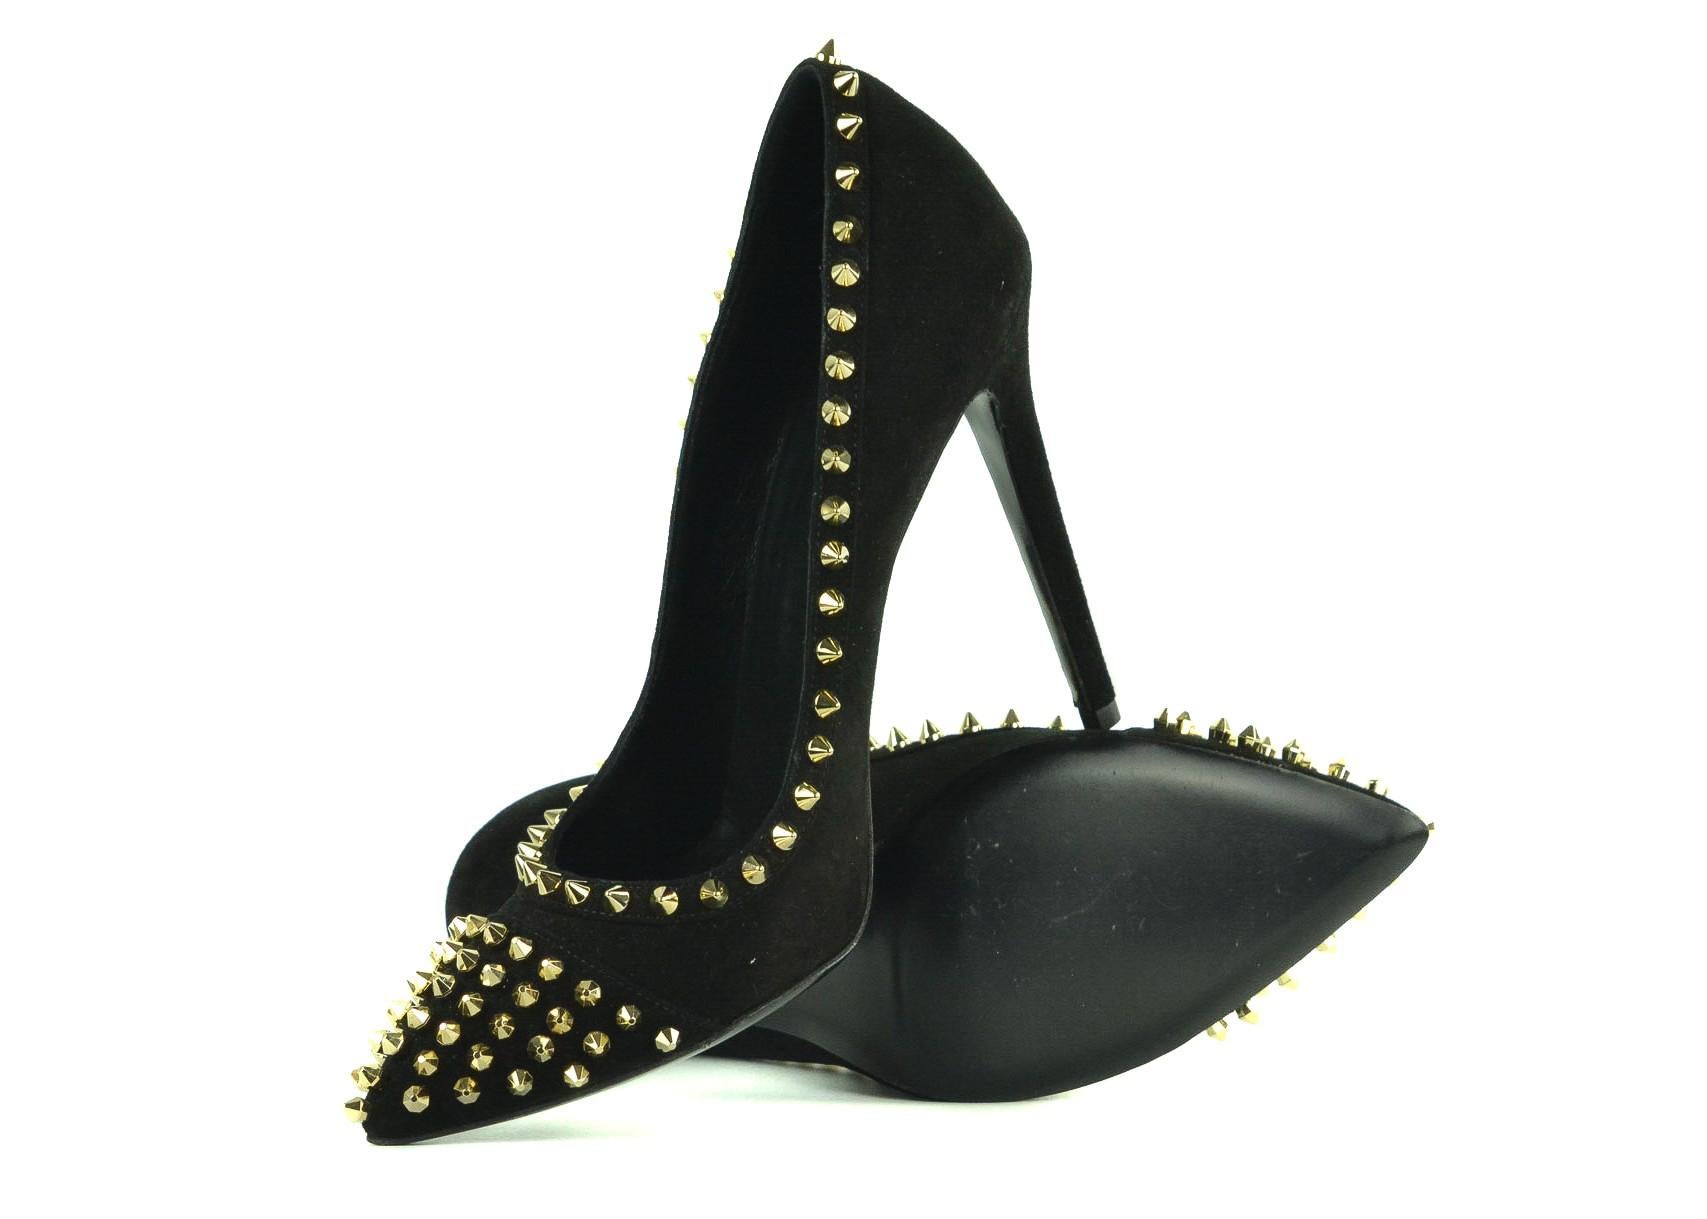 Philipp Plein's Suede Decollate Columbia Pumps will be the silent eye catcher in the room. These supple shoes feature a rich black suede, pointed toe line, and edgy gold spike studded appliques. This pair deals the deal with its Plein branded insole